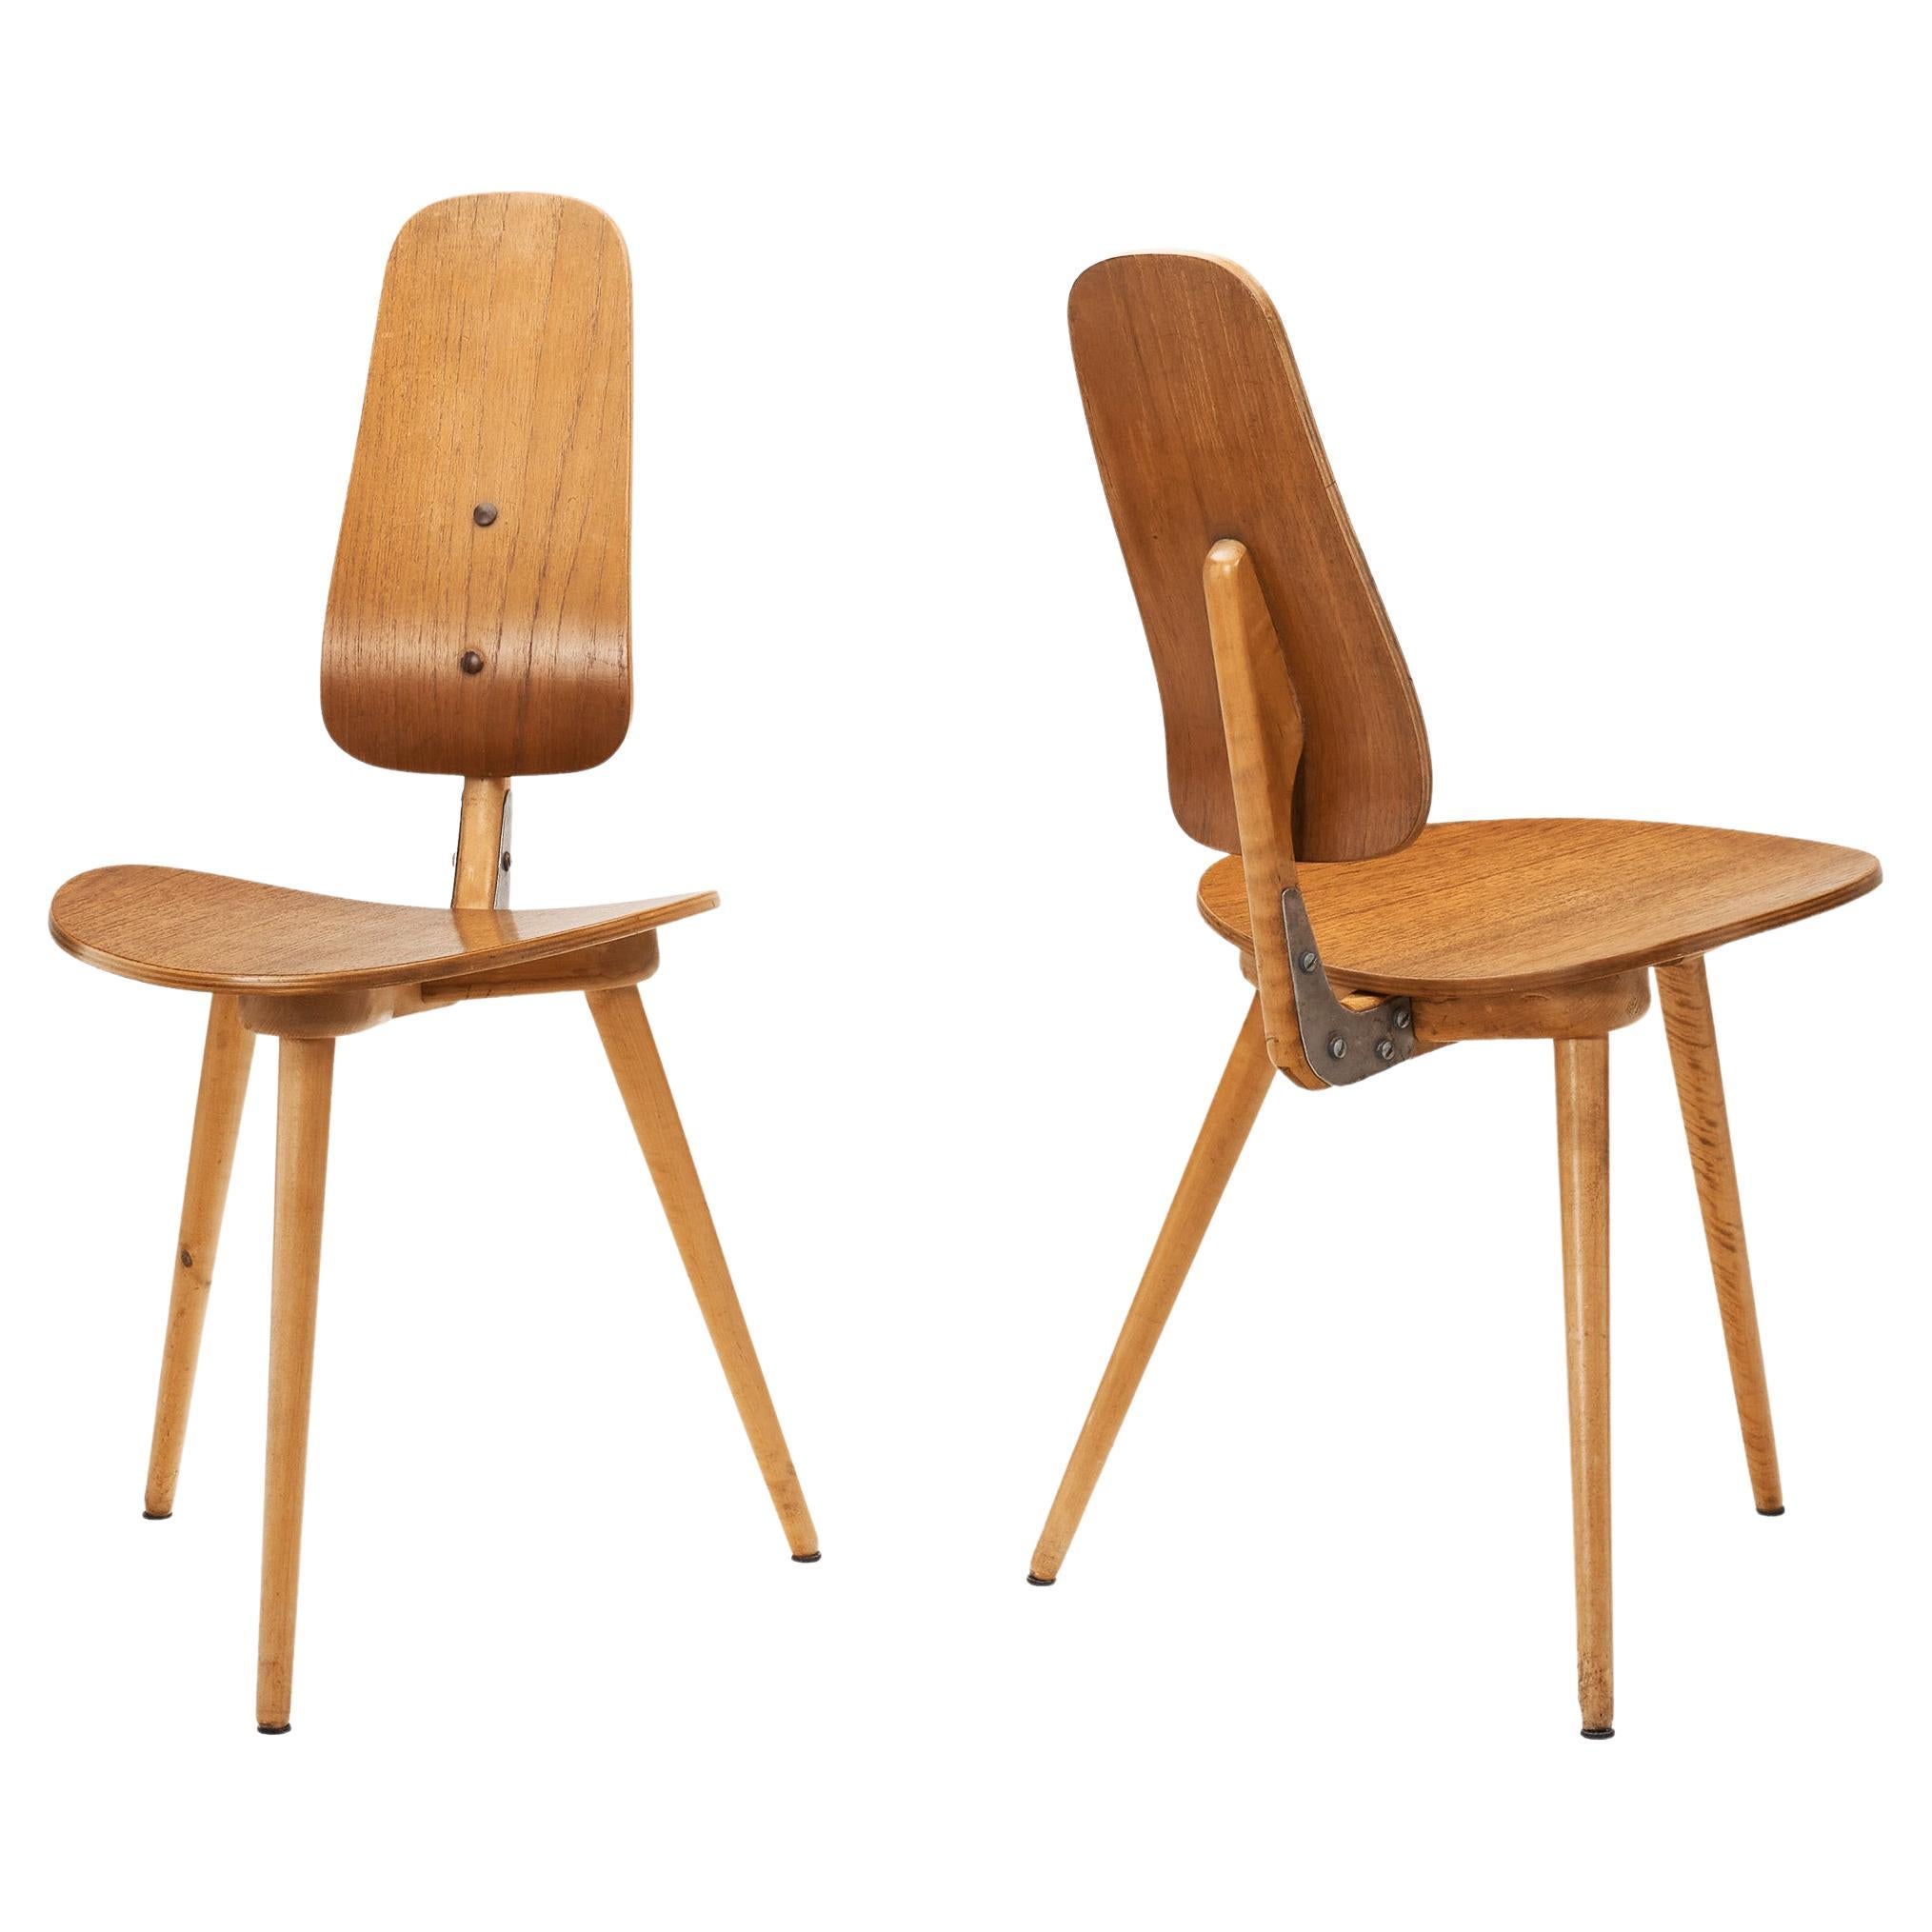 Pair of “Grill” Chairs by Bengt Ruda for Ikea, Sweden 1958